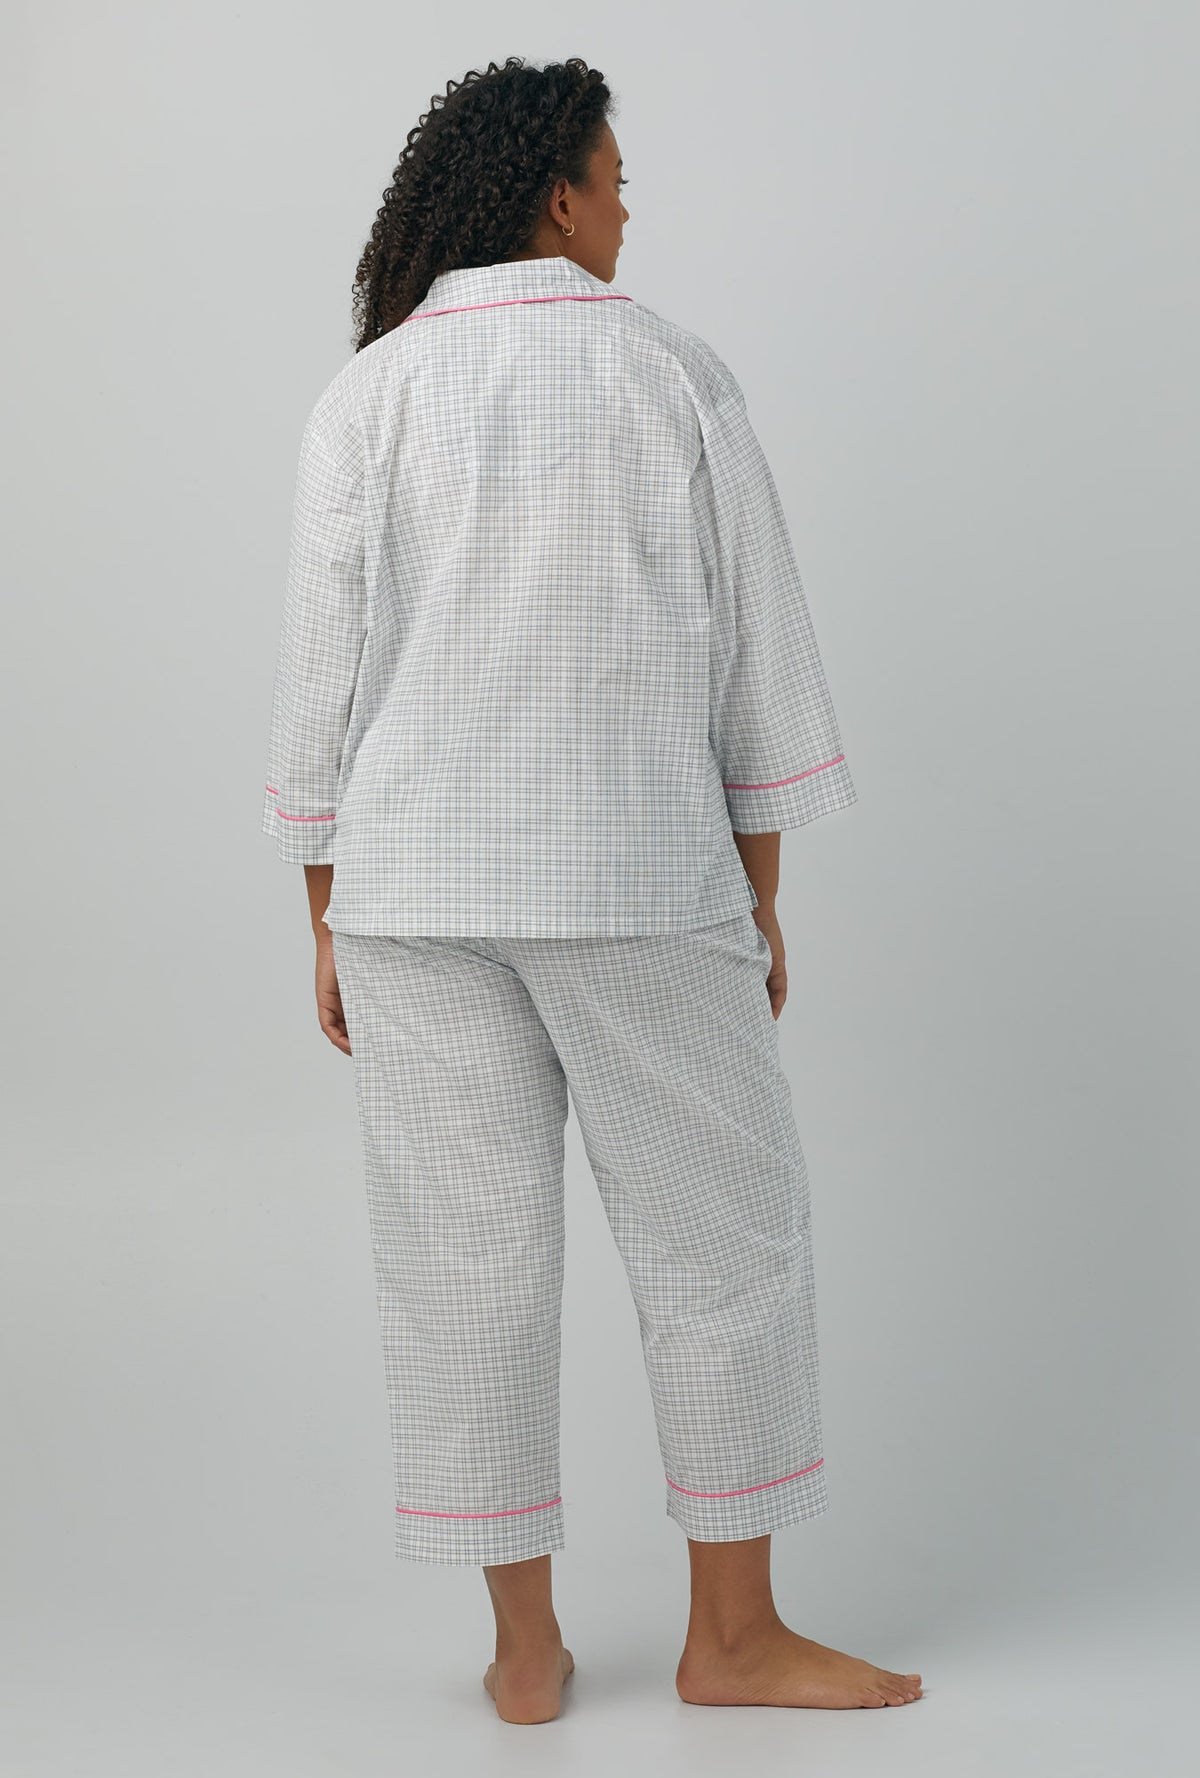 A lady wearing 3/4 Sleeve Classic Woven Cotton Poplin Cropped PJ Set with cottage plaid prints